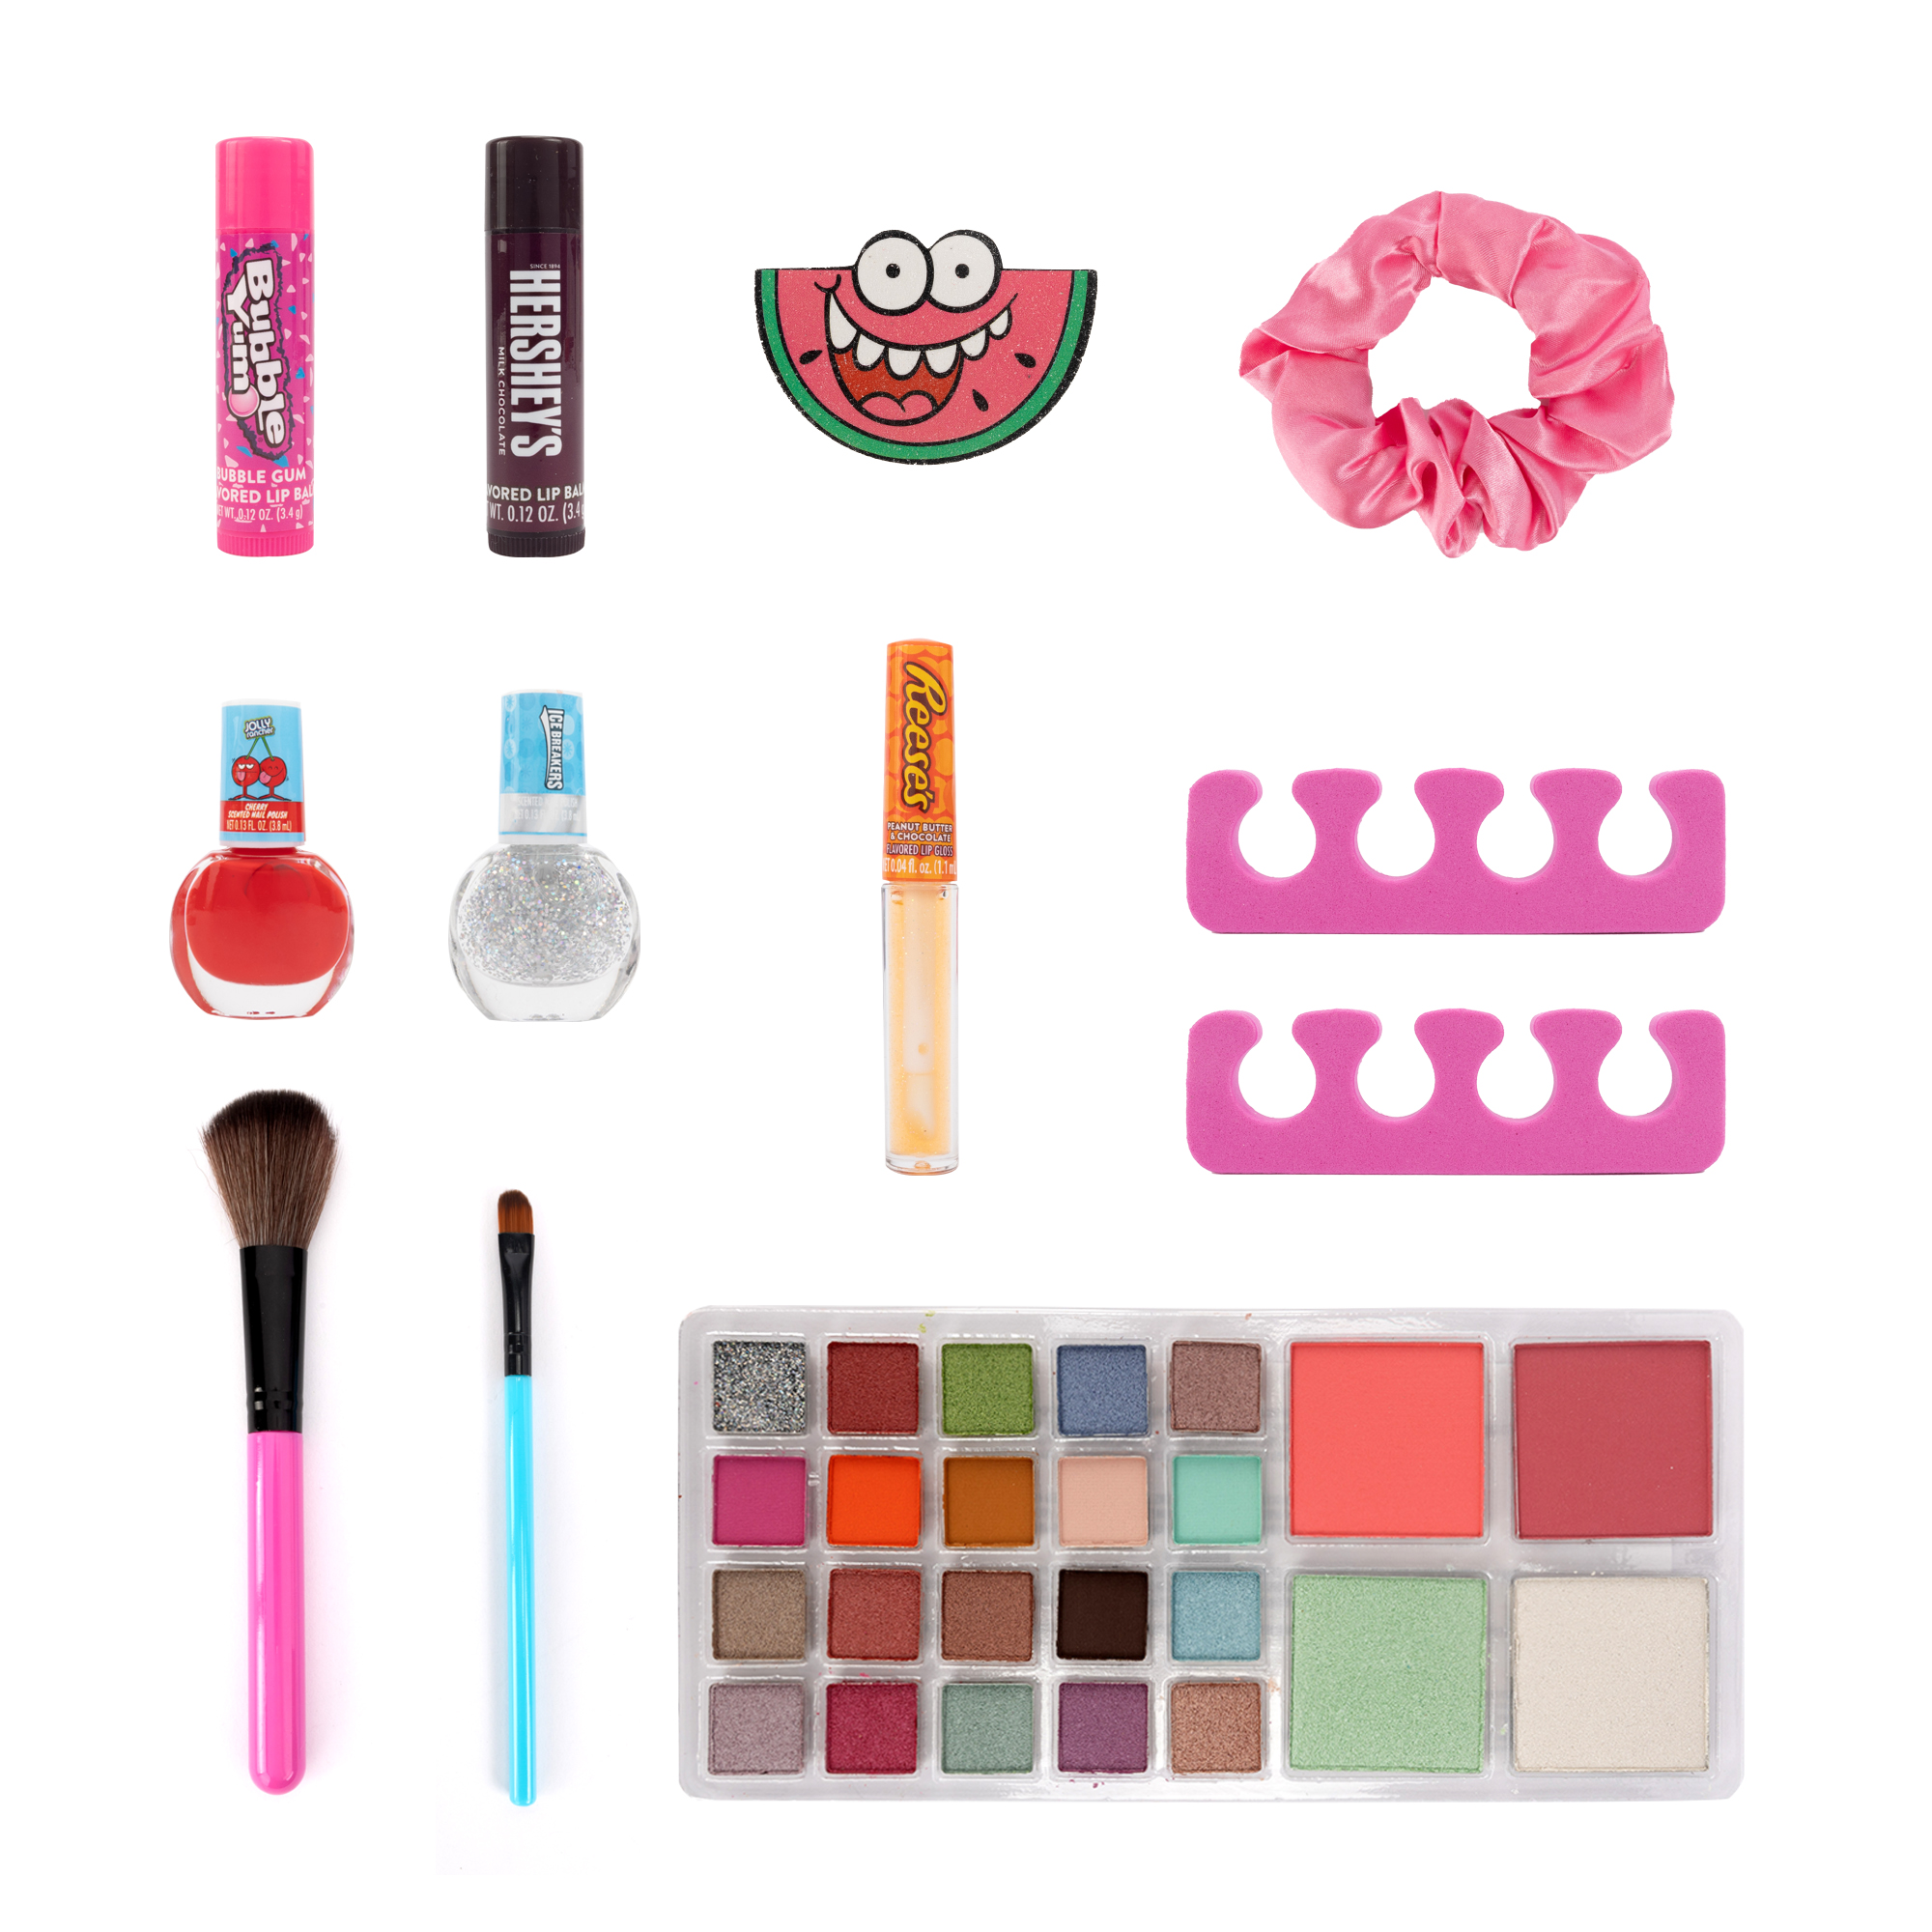 Caboodles x Taste Beauty x Hershey's On The Go Girl Cosmetic case with 13 piece cosmetic set - image 3 of 6